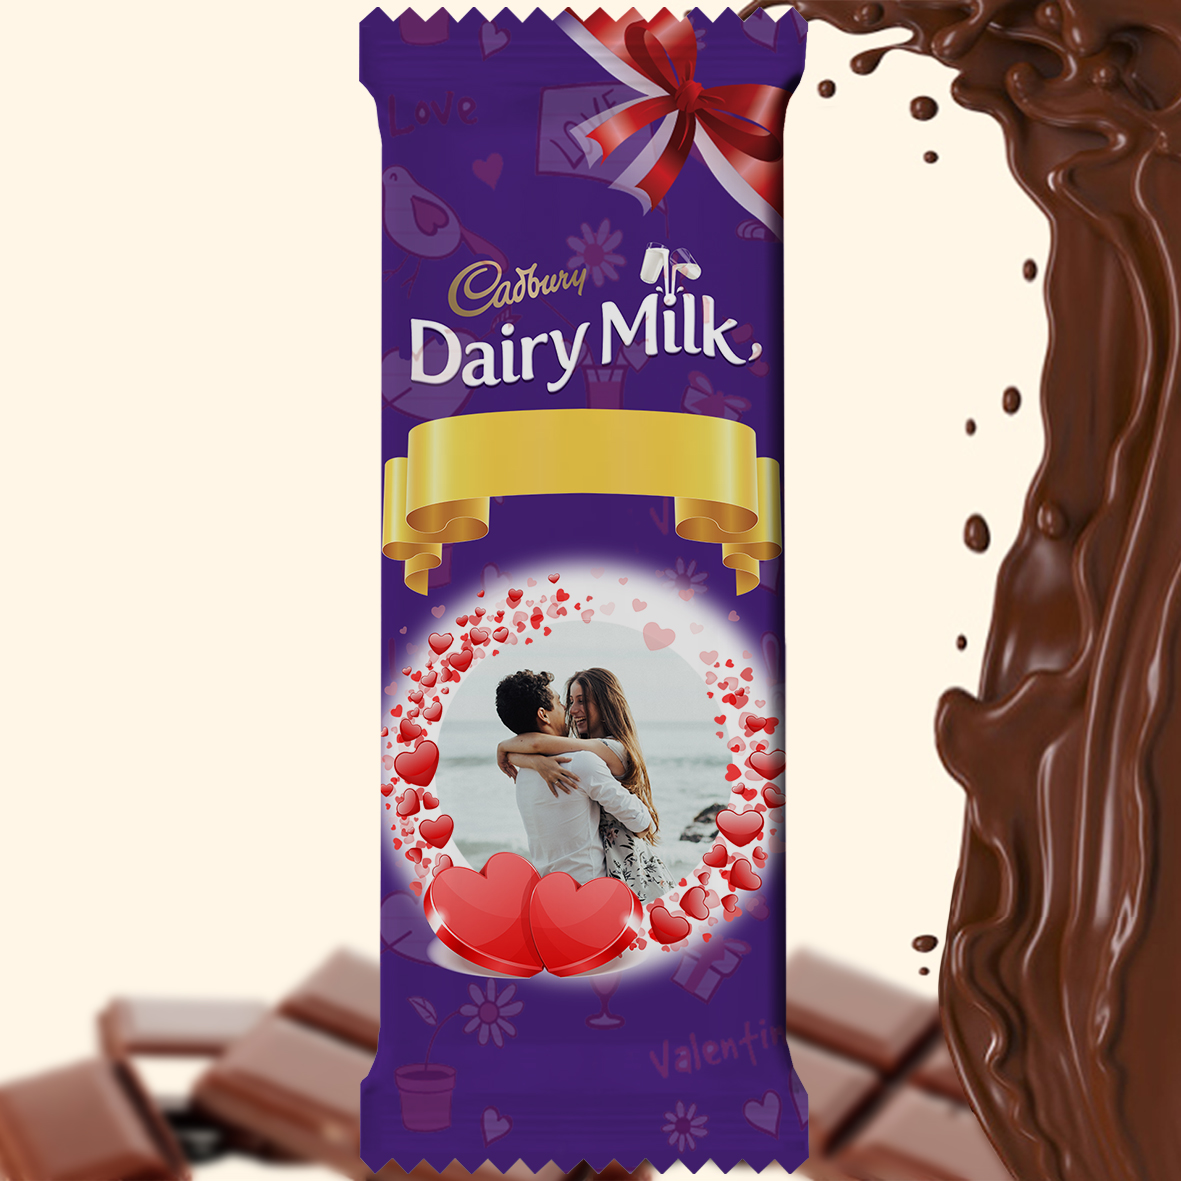 Cadbury Dairy Milk (50g) wrapped in Customized Photo Printed Wrapper (Type 02)